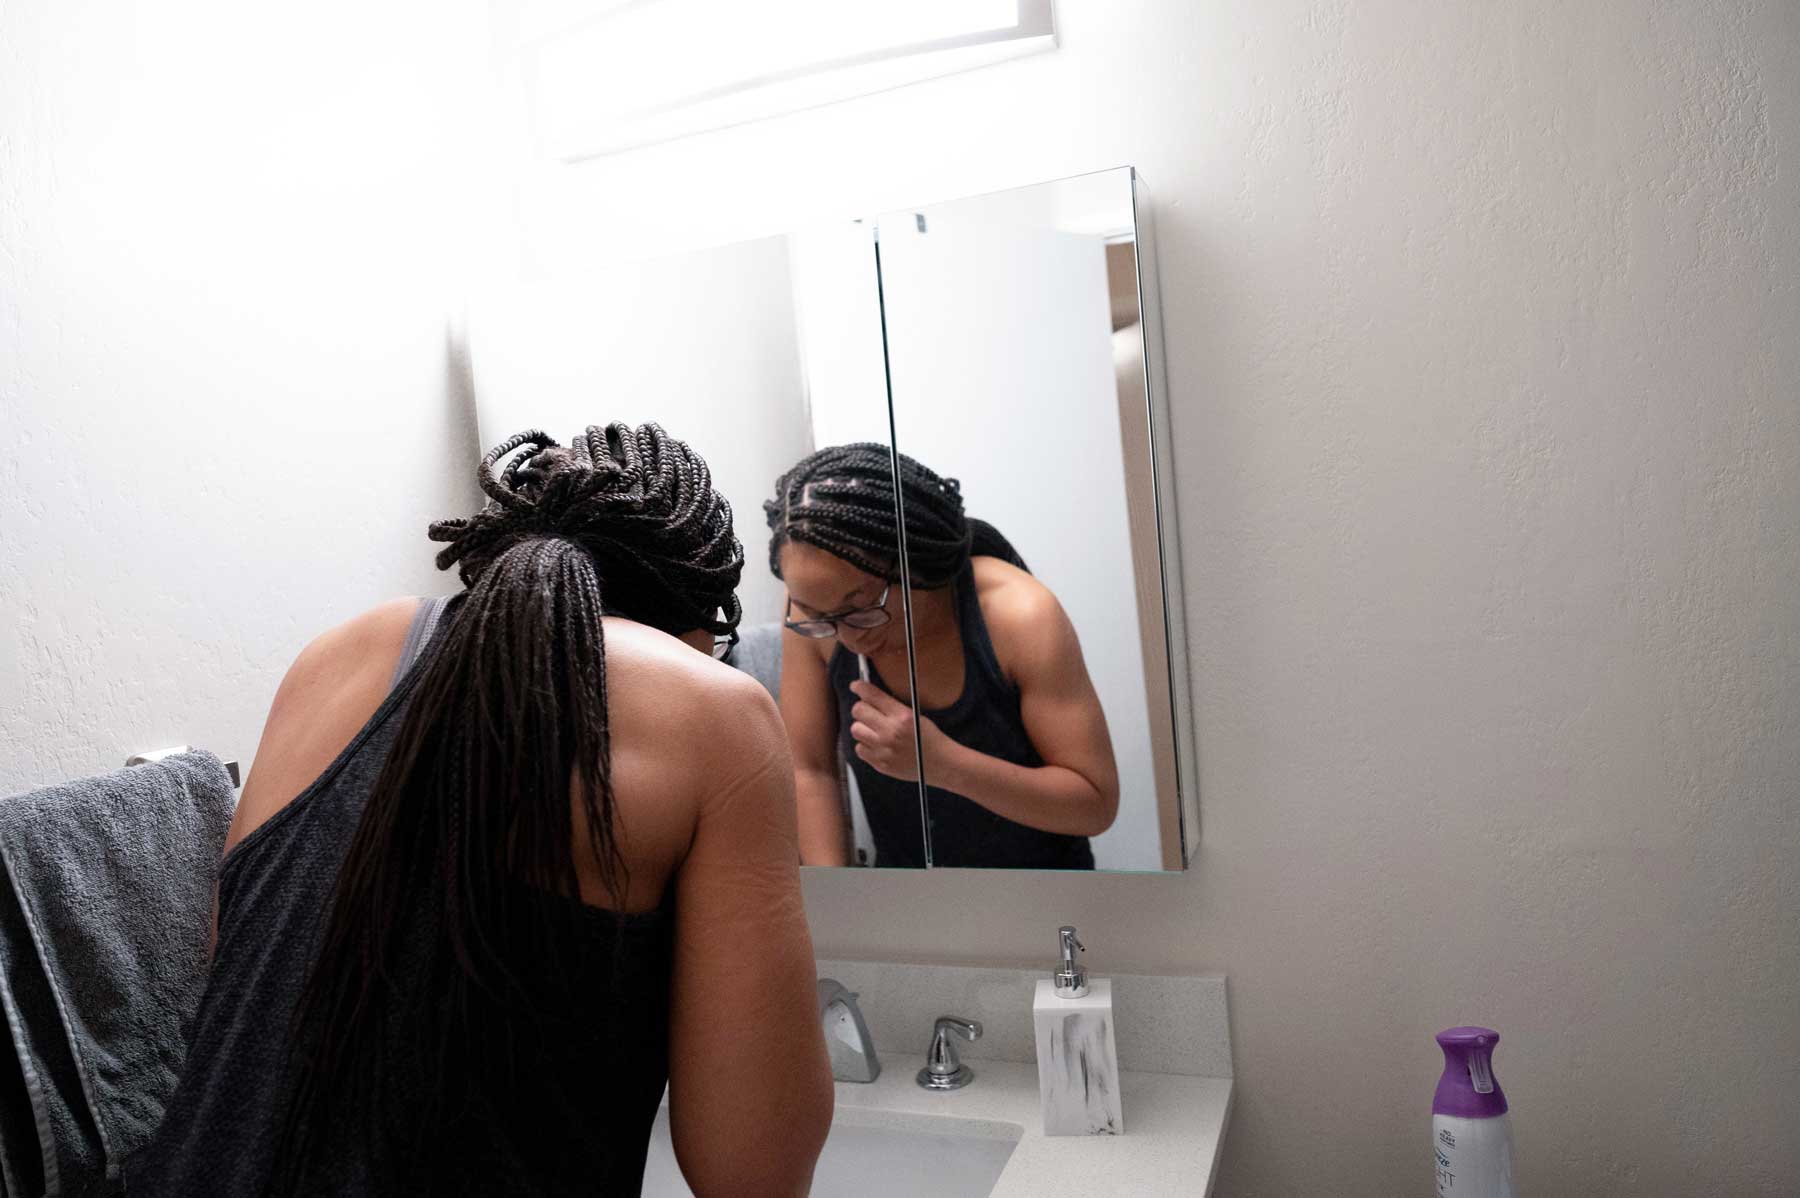 A young Black woman named Kelechi Okpara brushes her teeth over her bathroom sink early in the morning.